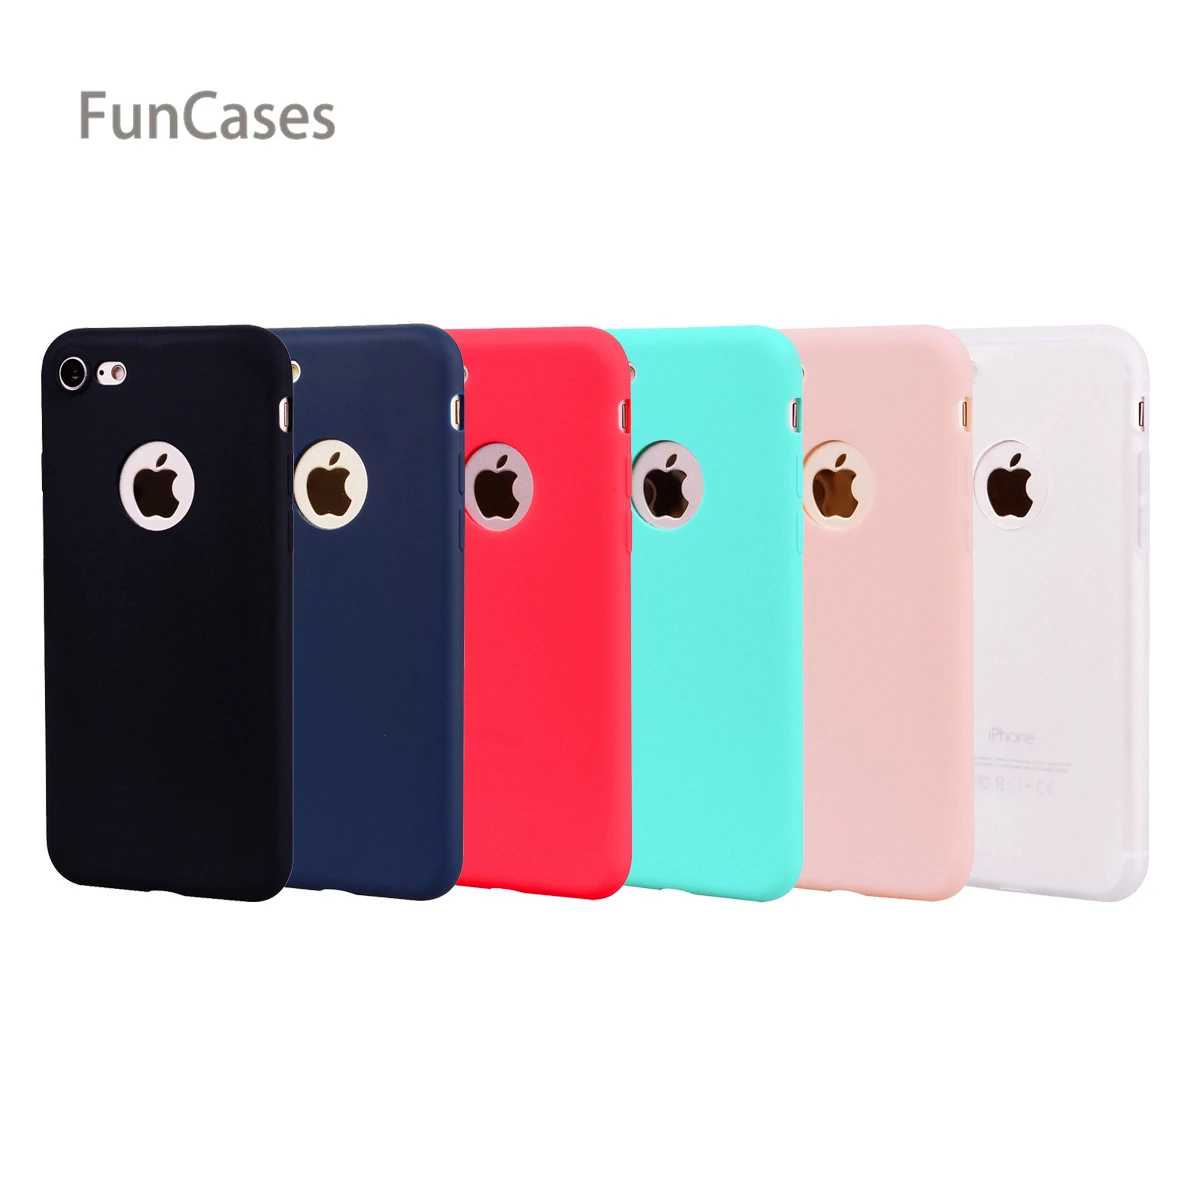 Simple sFor Hoesjes iPhone 7 Soft Silicone Back Cover Cellular Patterned Telefon Aksesuar Case sFor iPhone Skal - AliExpress